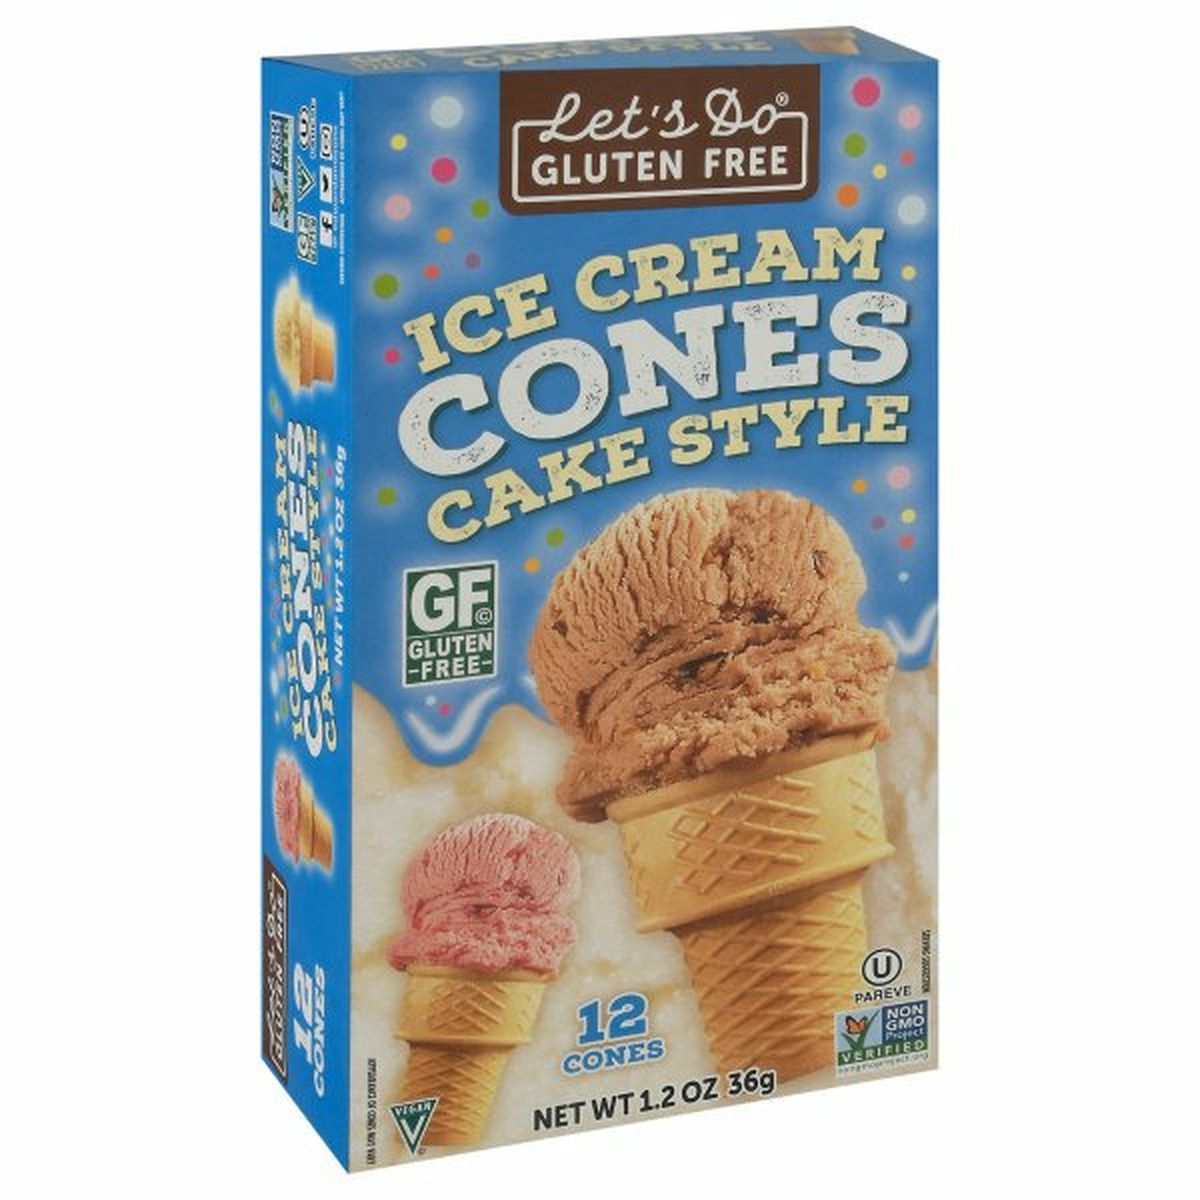 Calories in Edward & Sons Gluten Free Ice Cream Cones, Cake Style